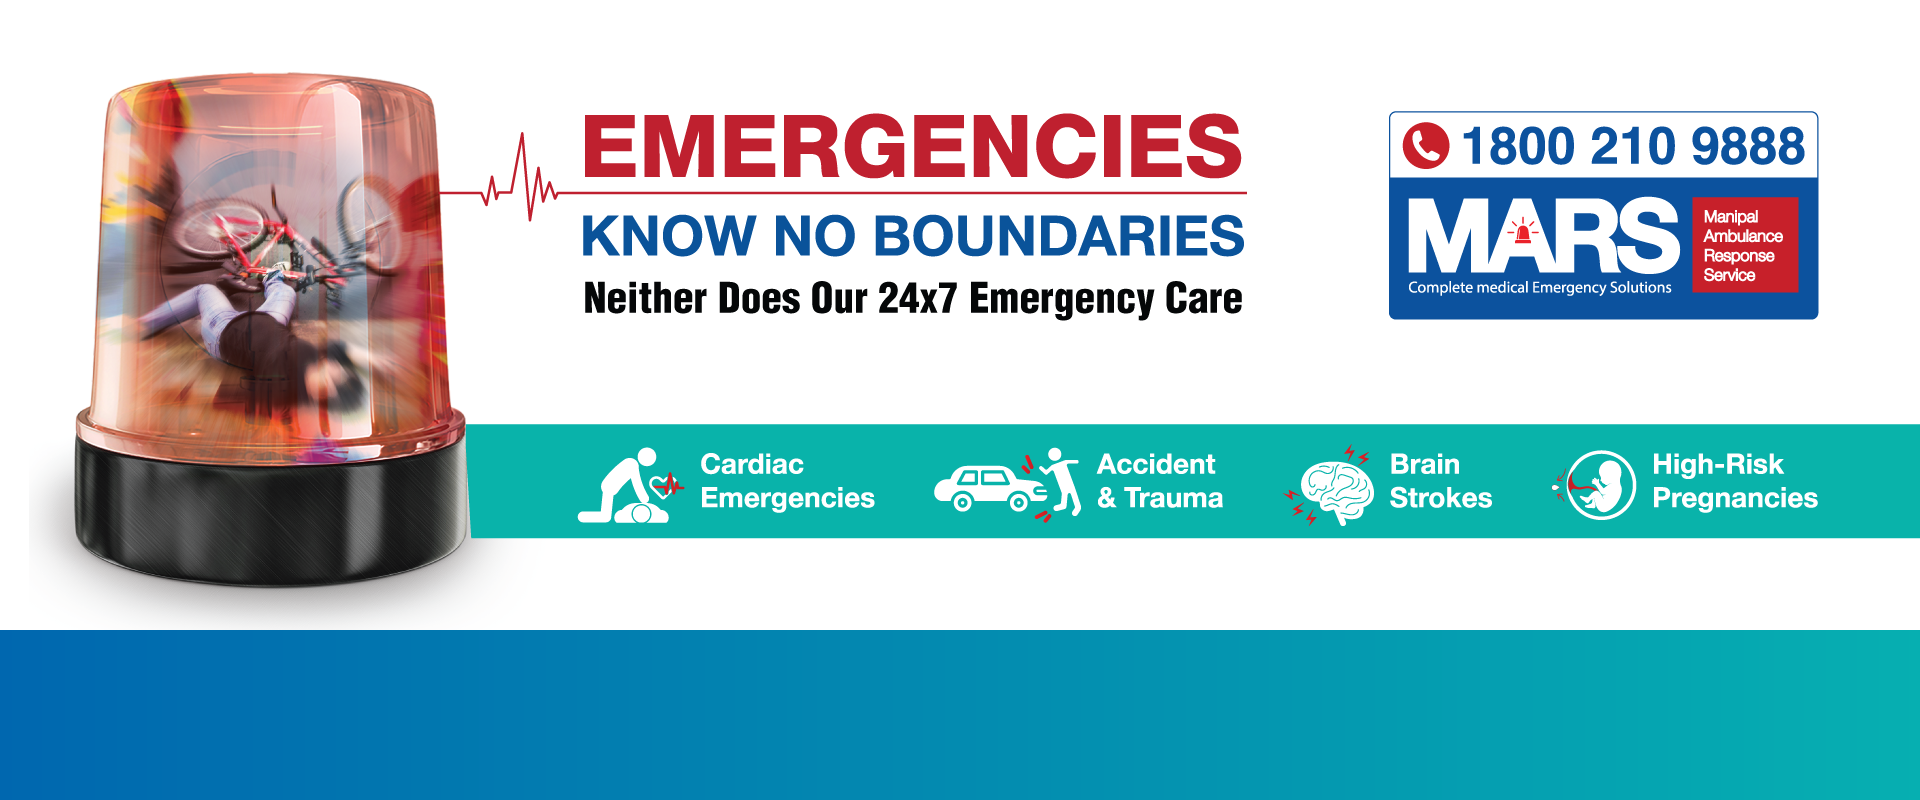 24x7 Emergency Care in Pune | MARS Ambulance Service - Manipal Hospitals